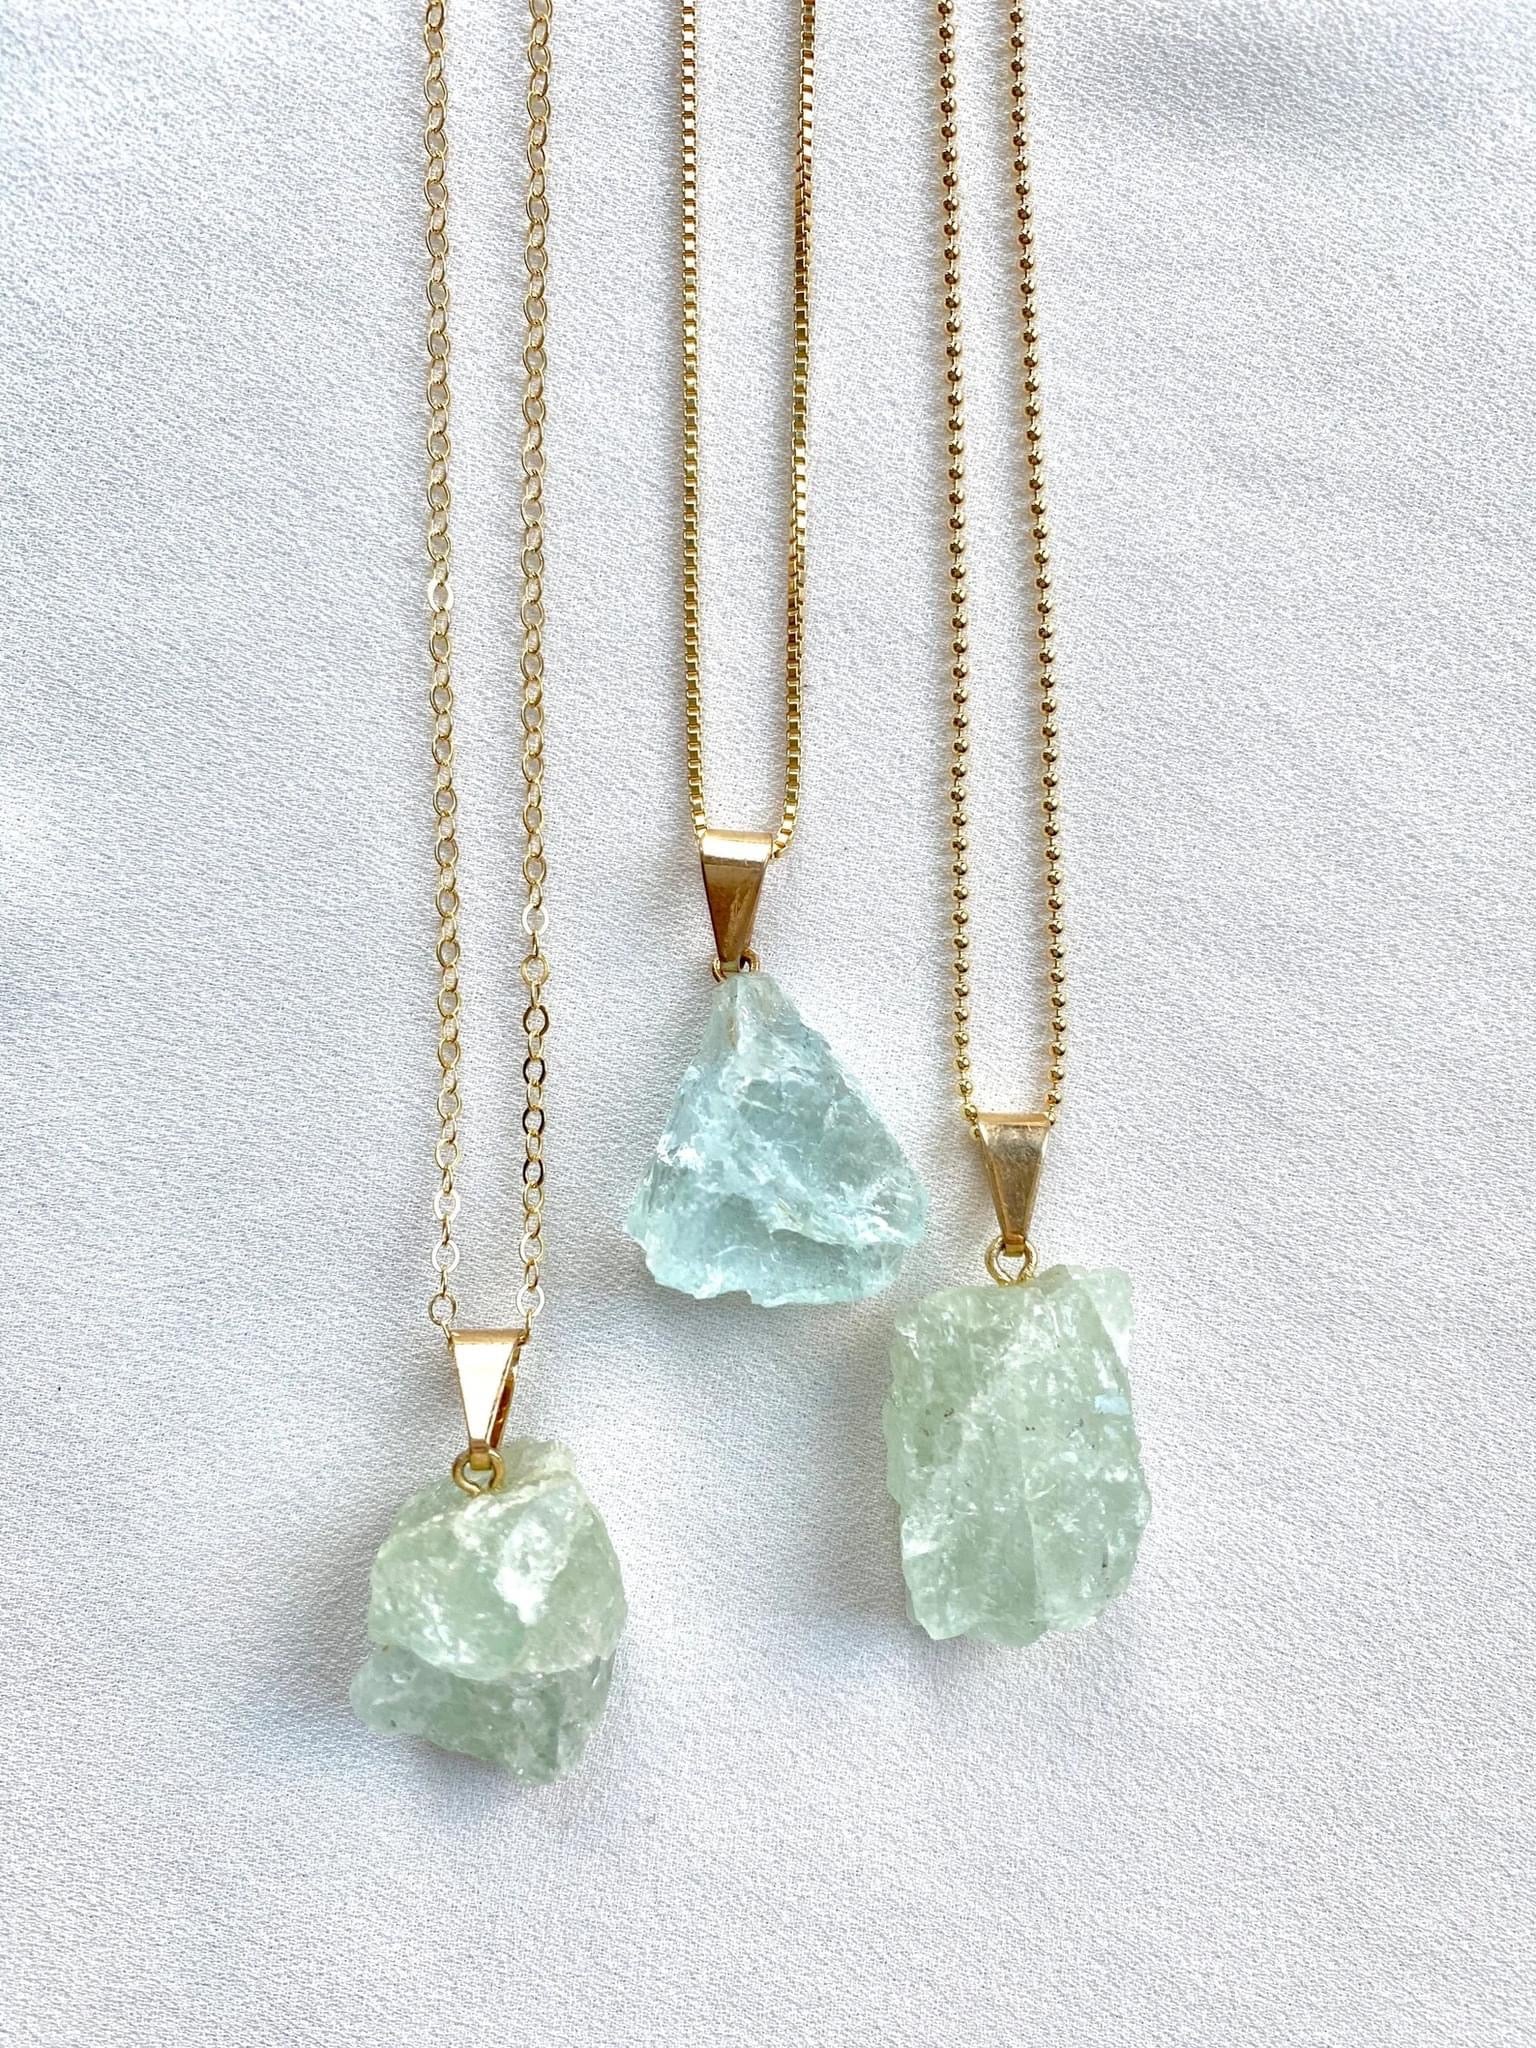 Aquamarine Necklace - Raw Collection by Boutique baltique